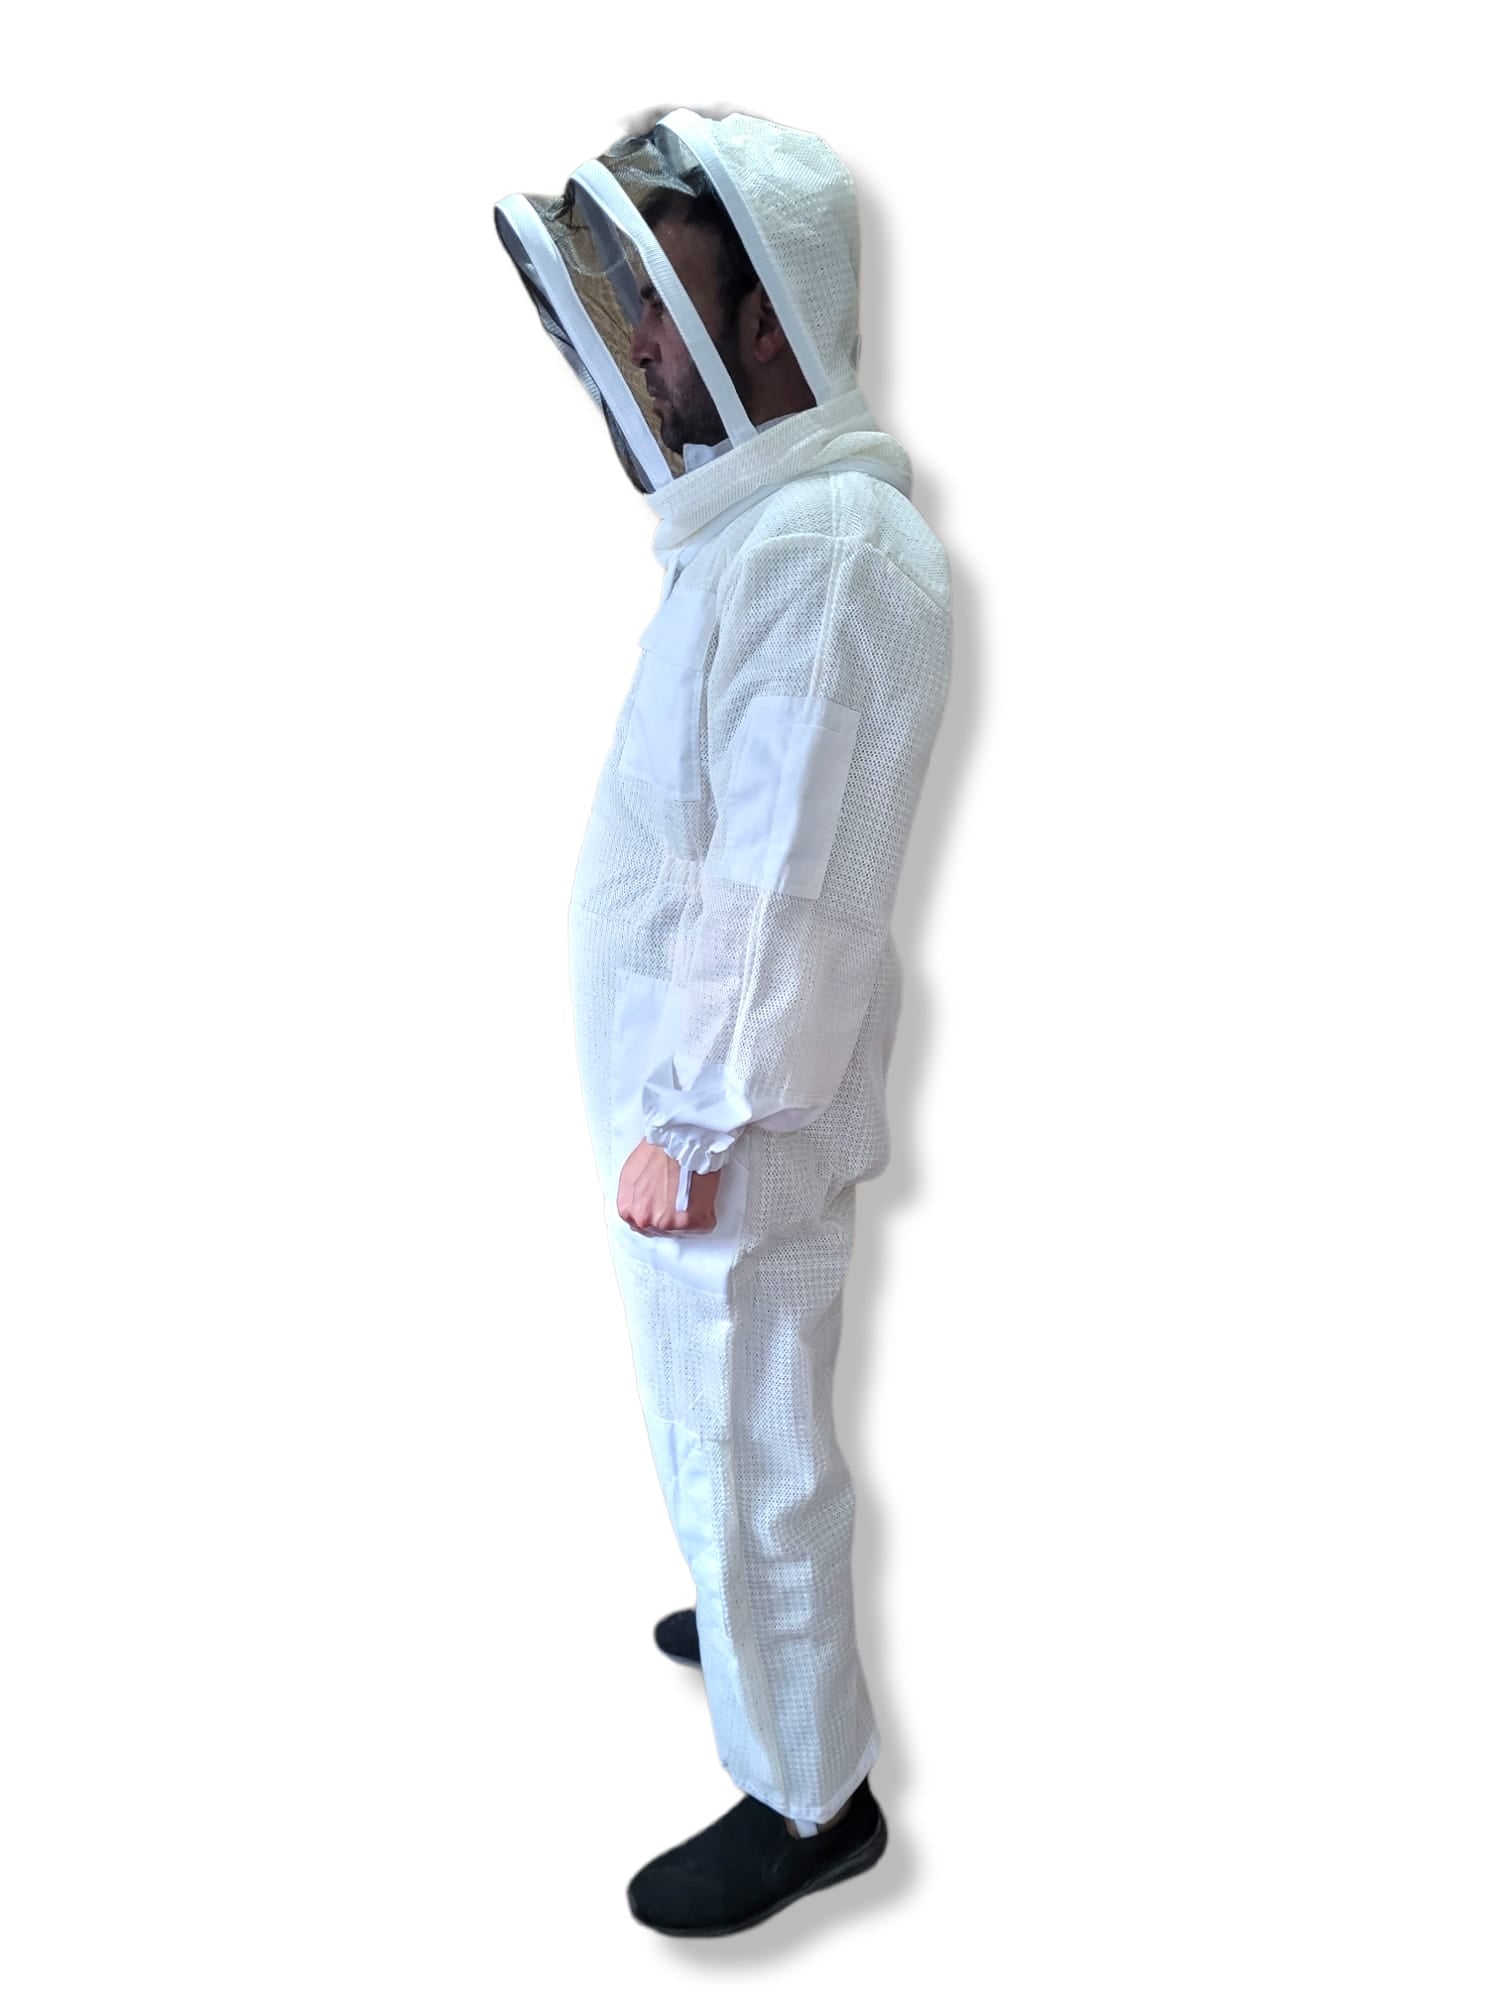 Fully Ventilated Beekeeping Suit - Donagh Bees